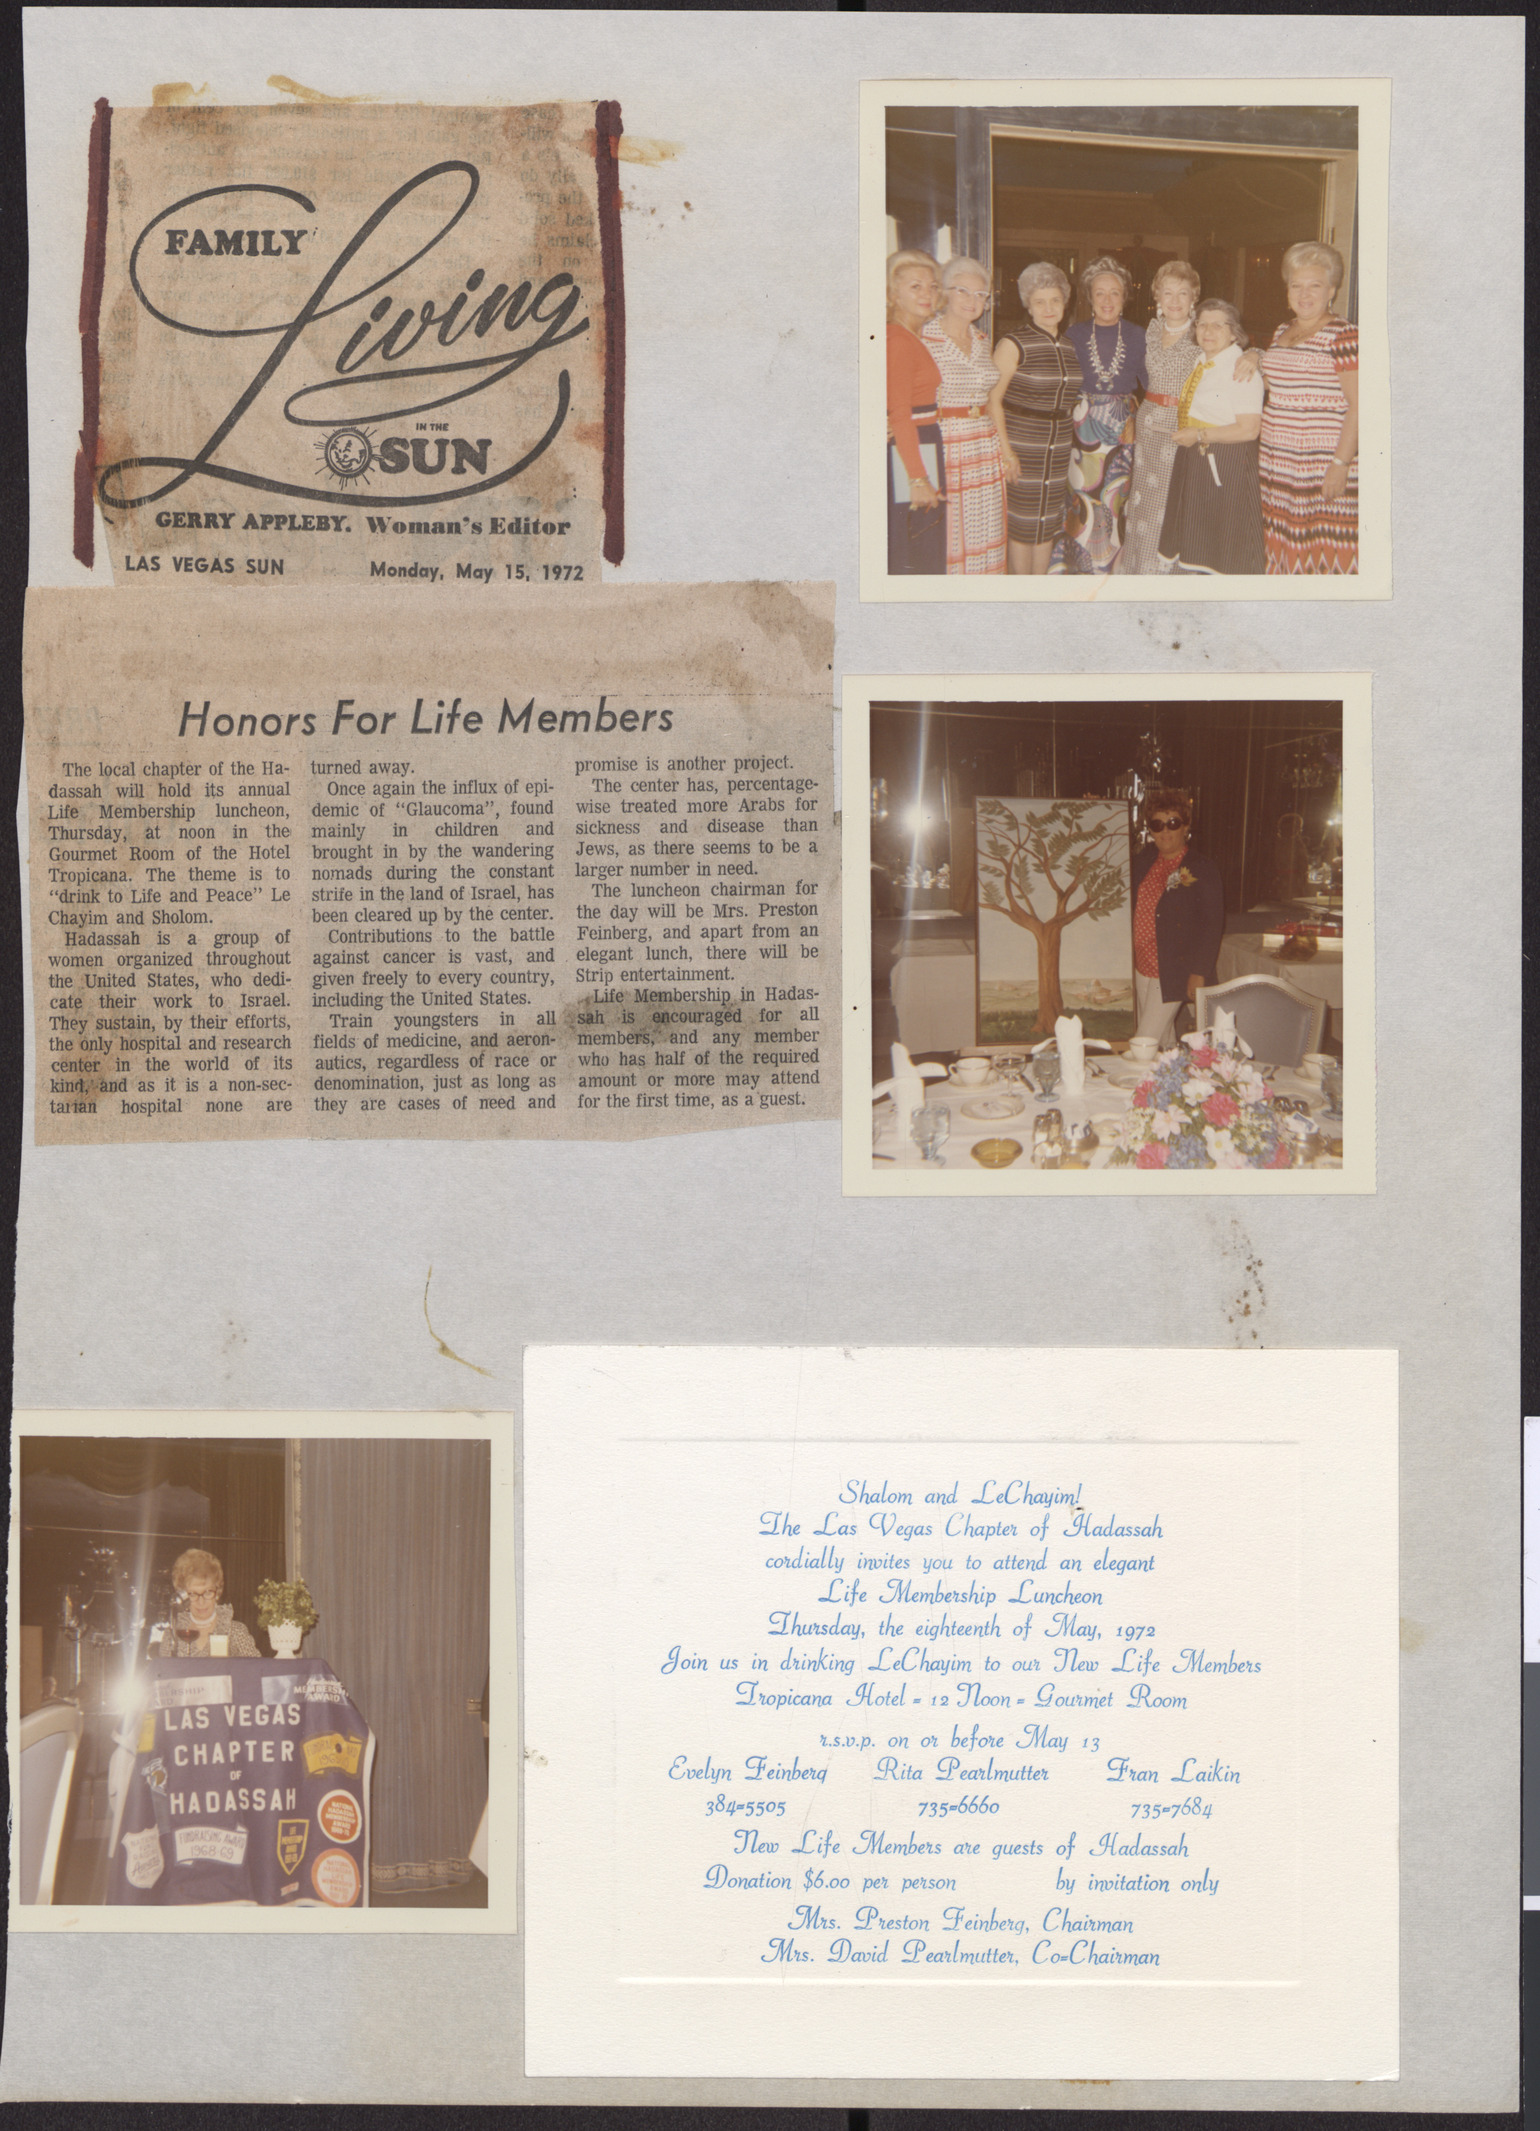 Newspaper clipping about Hadassah Life Membership luncheon, with photograph and invitation to the event, May 18, 1972